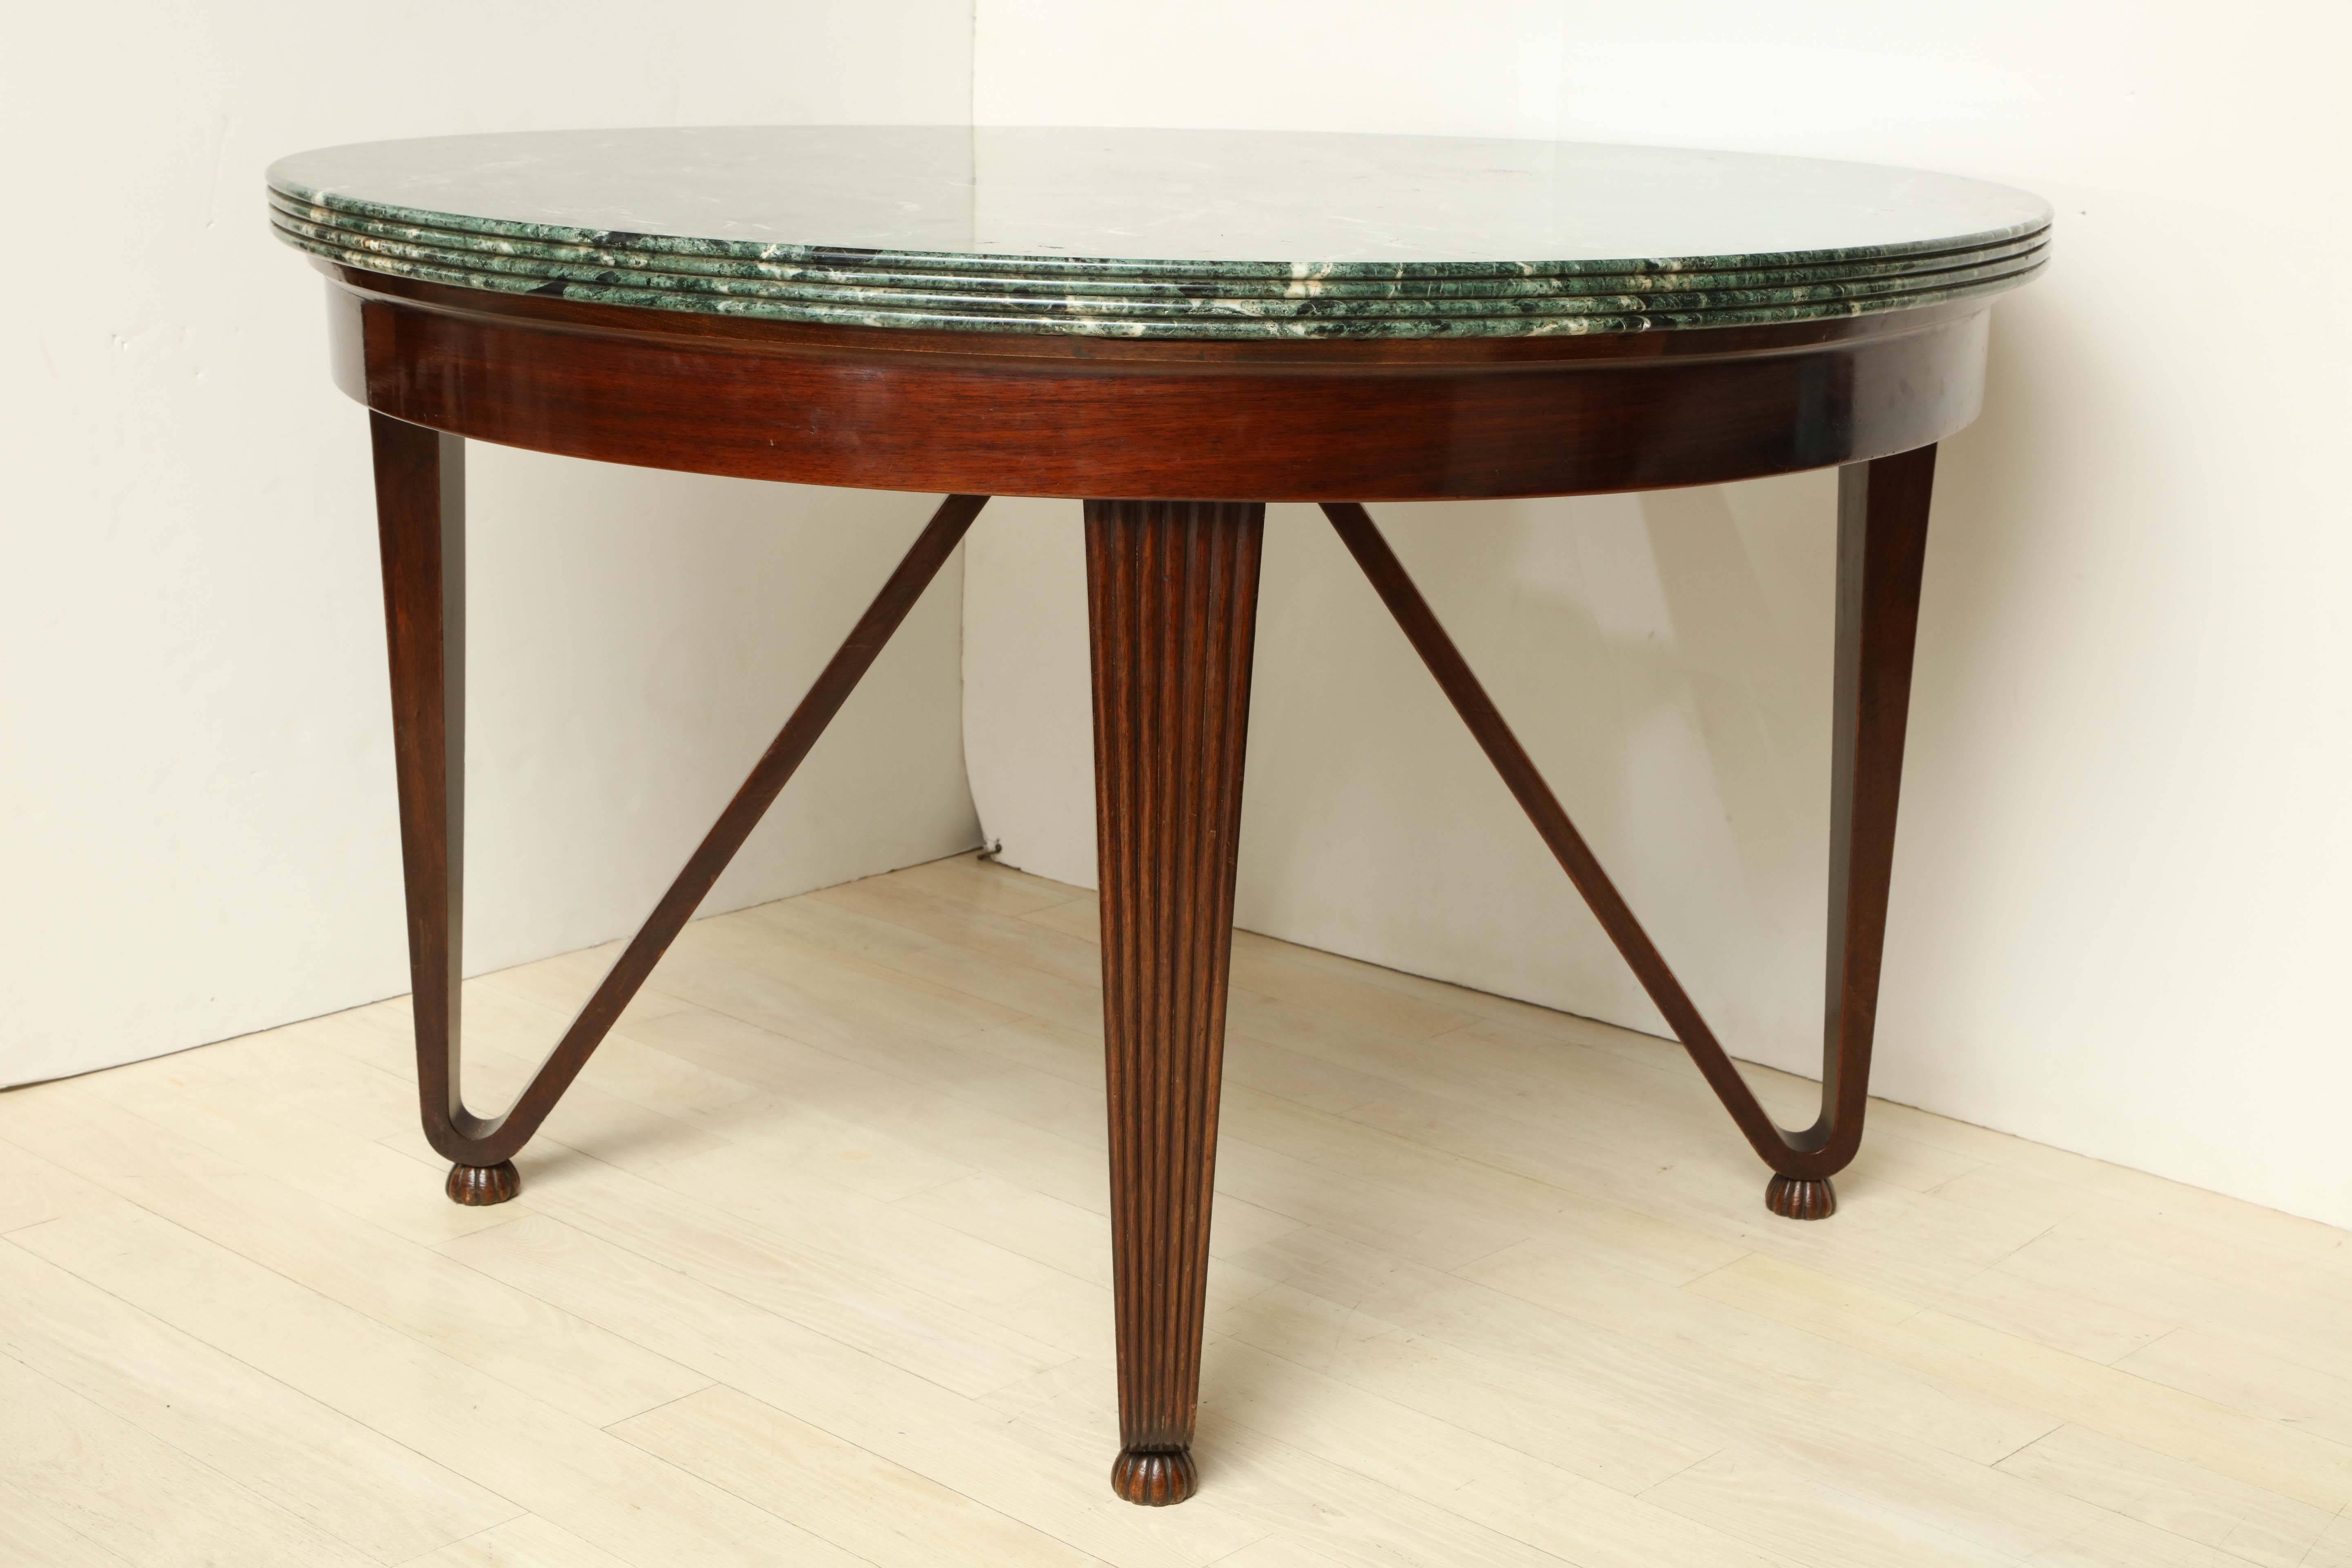 Large, round mahogany center table with tapering, sculpted legs and original green marble top with ribbed edge, Italian, circa 1960.

Dimensions: 49.25” D, 31”H.